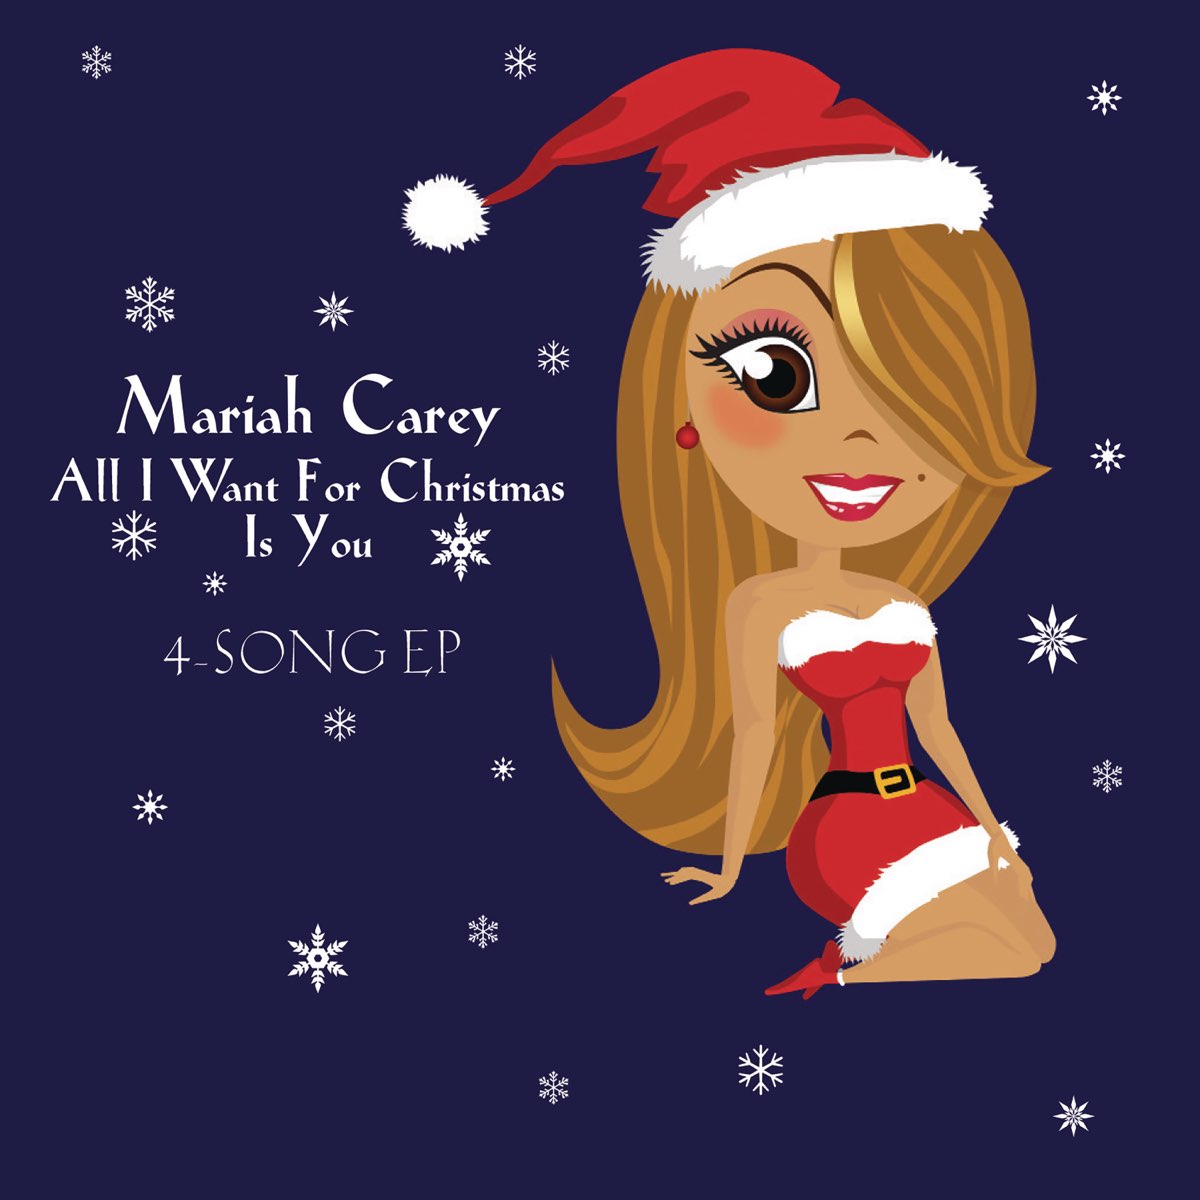 Mariah carey i want. All i want for Christmas. All i want for Christmas is you. Mariah Carey all Christmas. Mariah Carey all i want for Christmas.